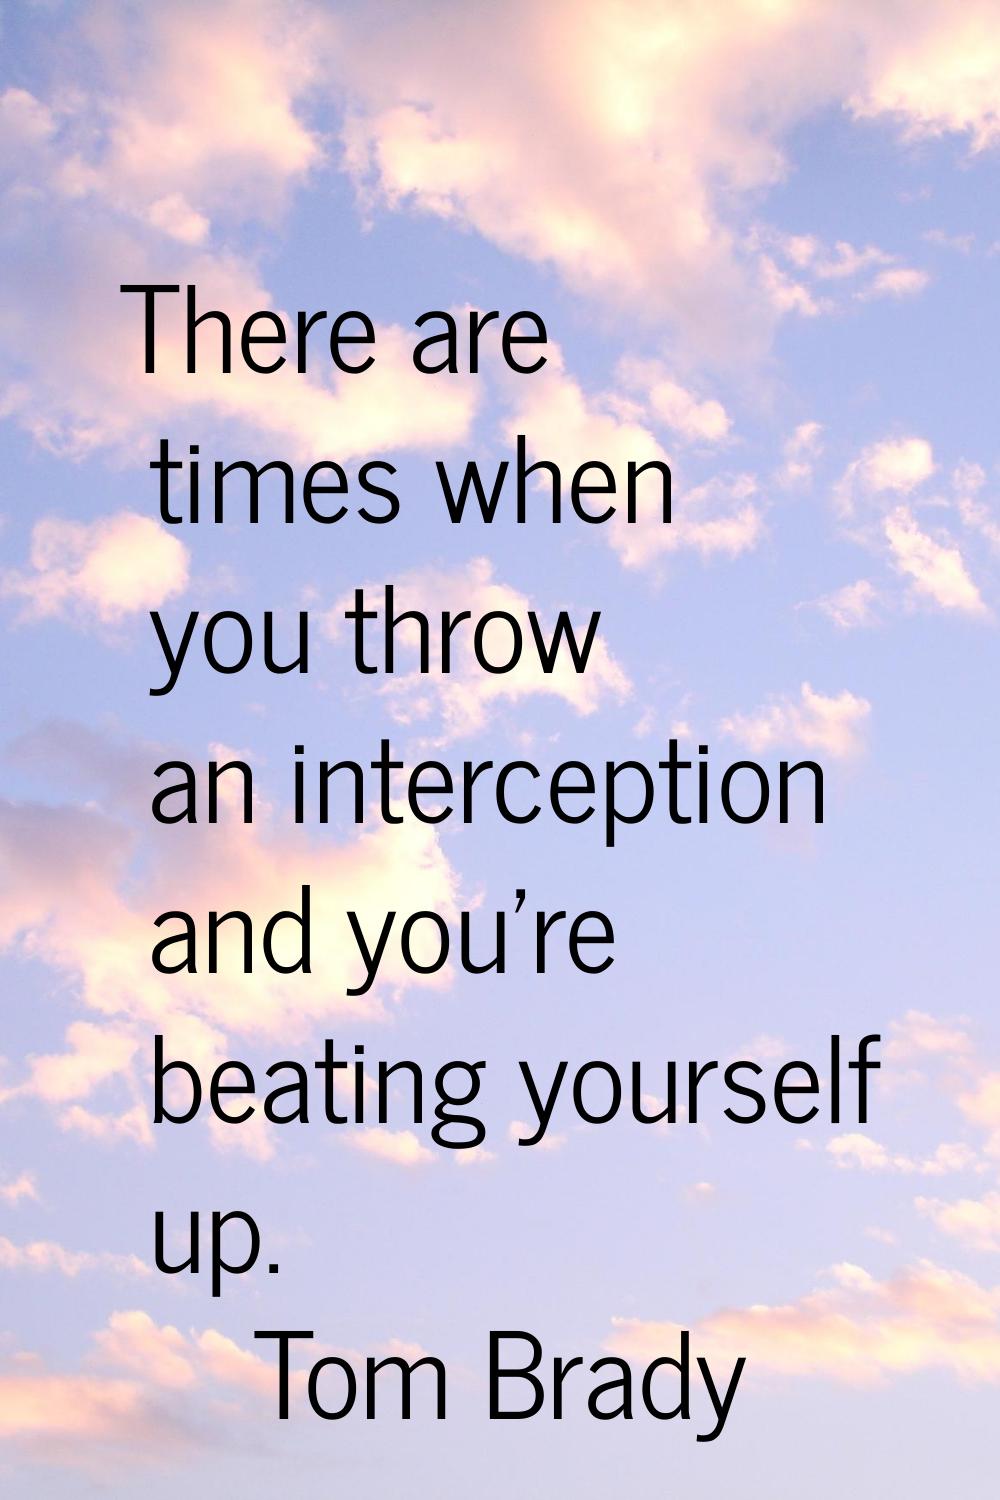 There are times when you throw an interception and you're beating yourself up.